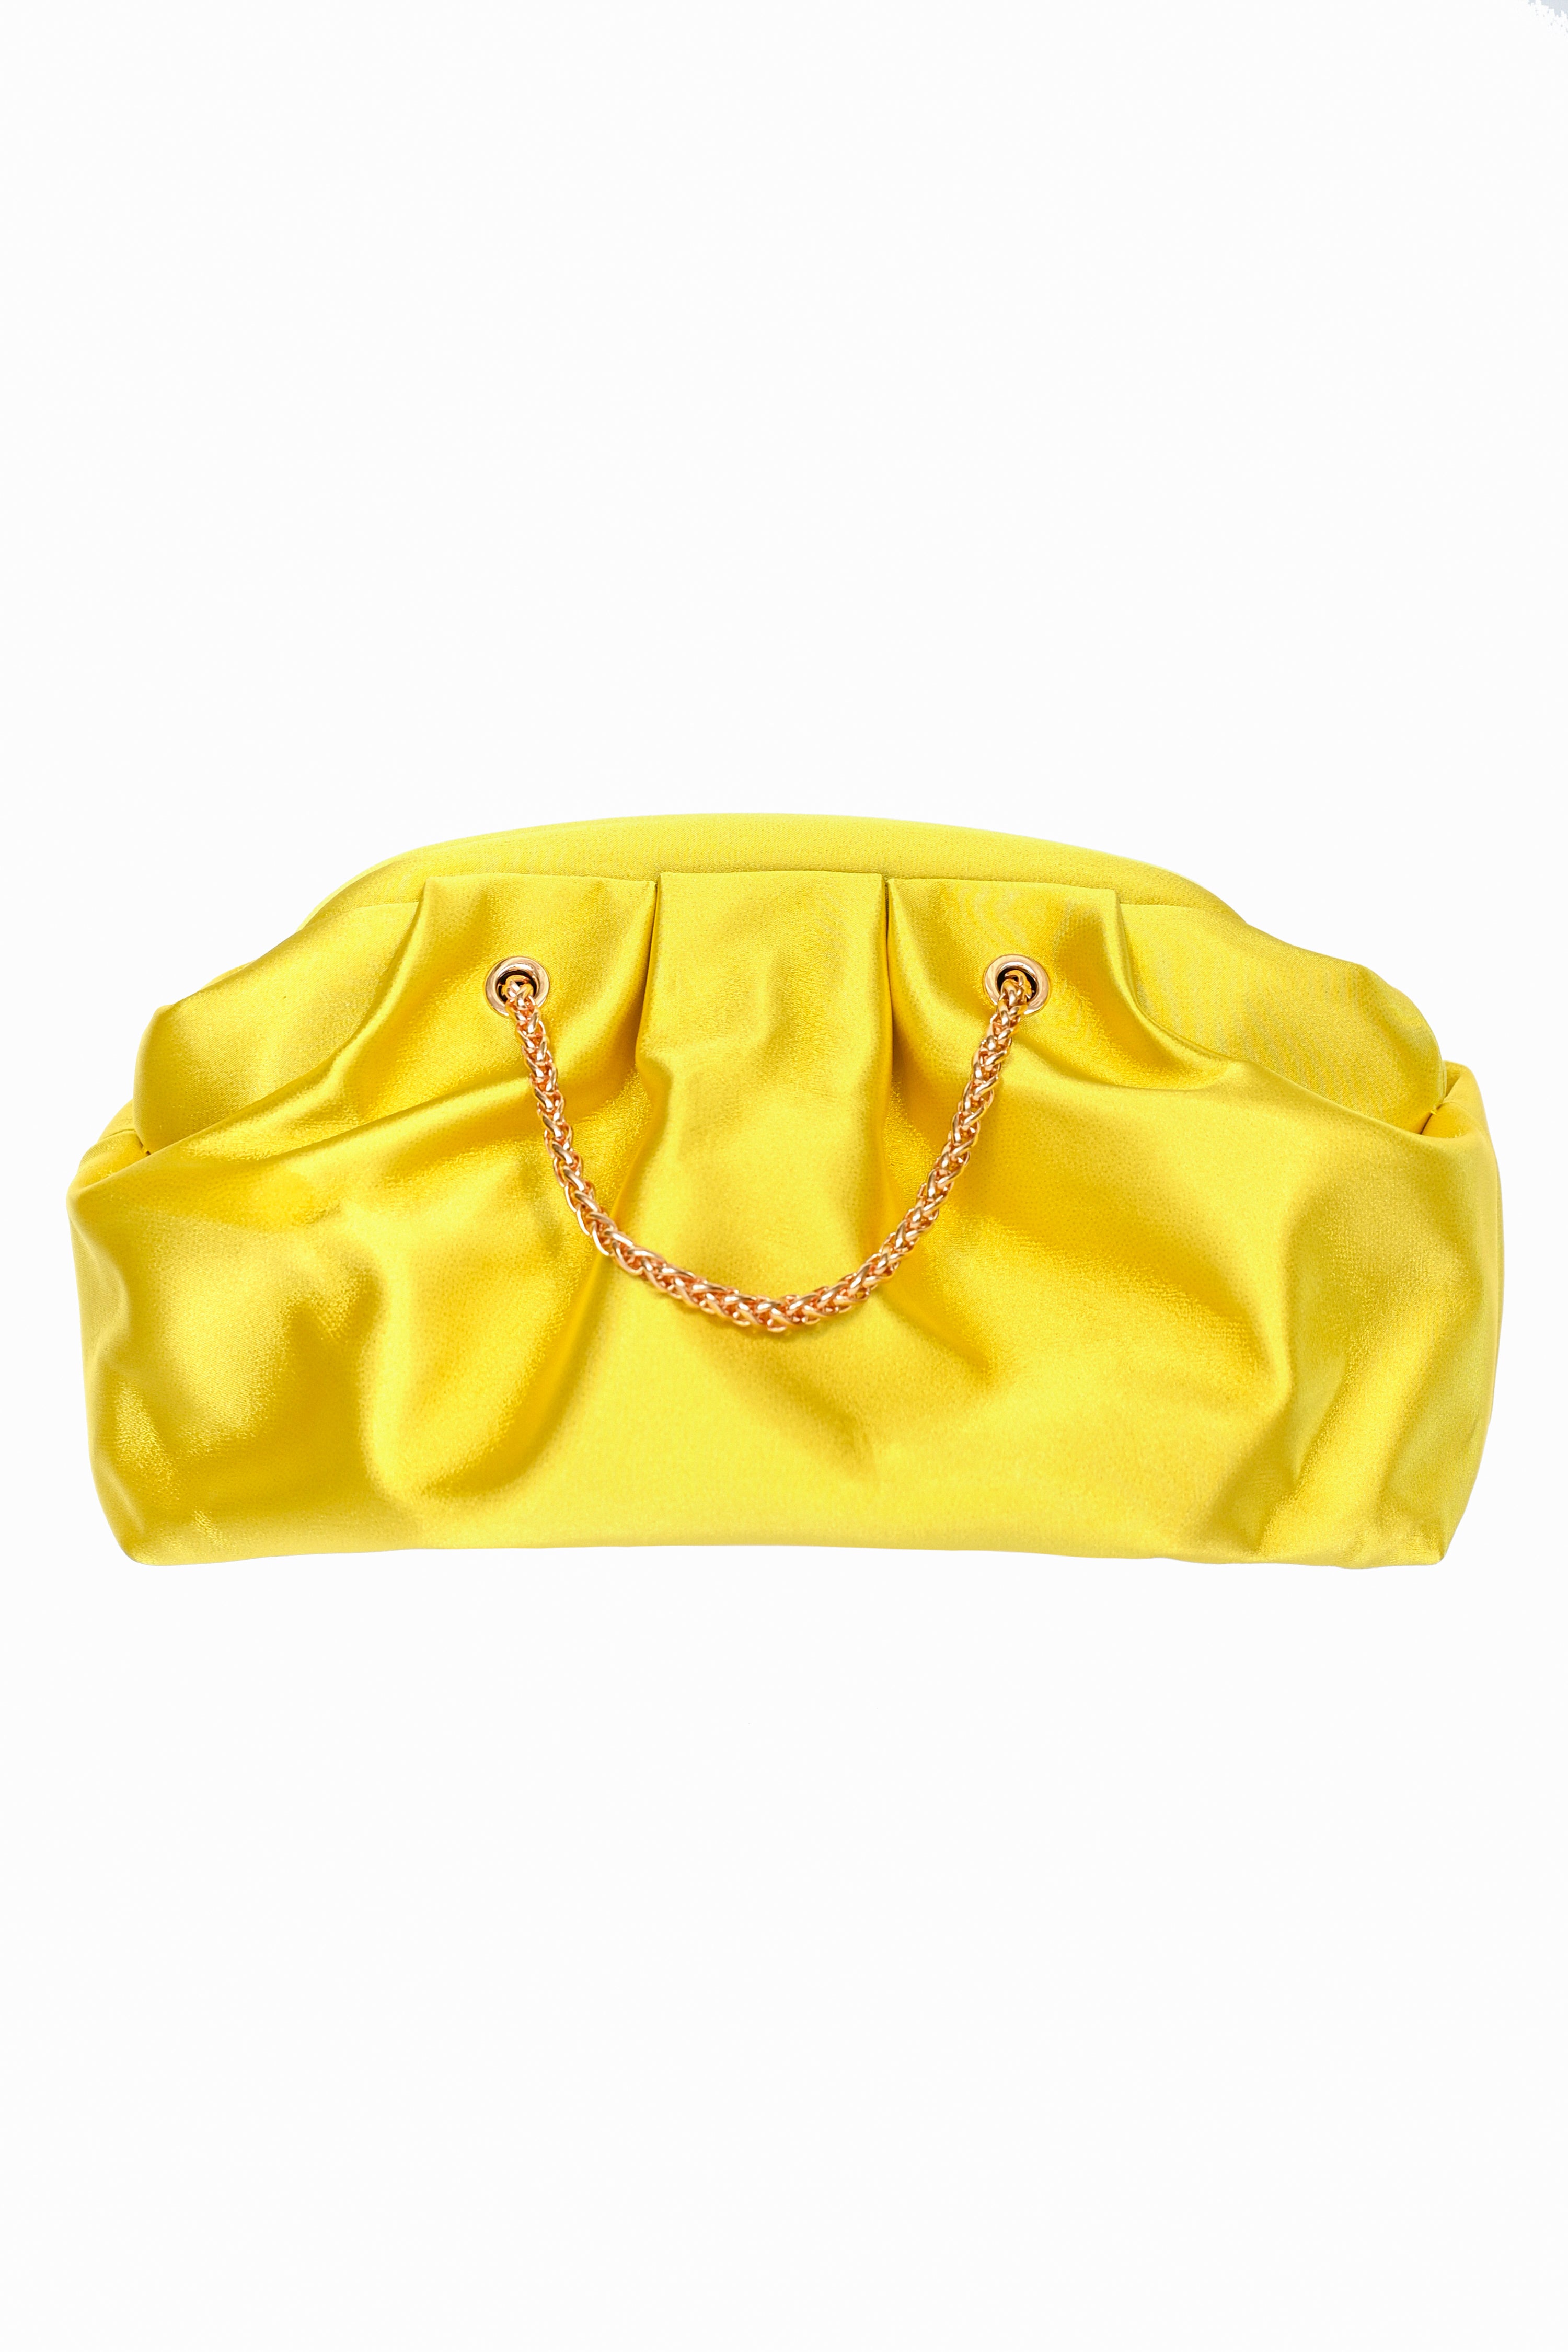 A yellow/gold colored handbag with a gold chain and hinge opening